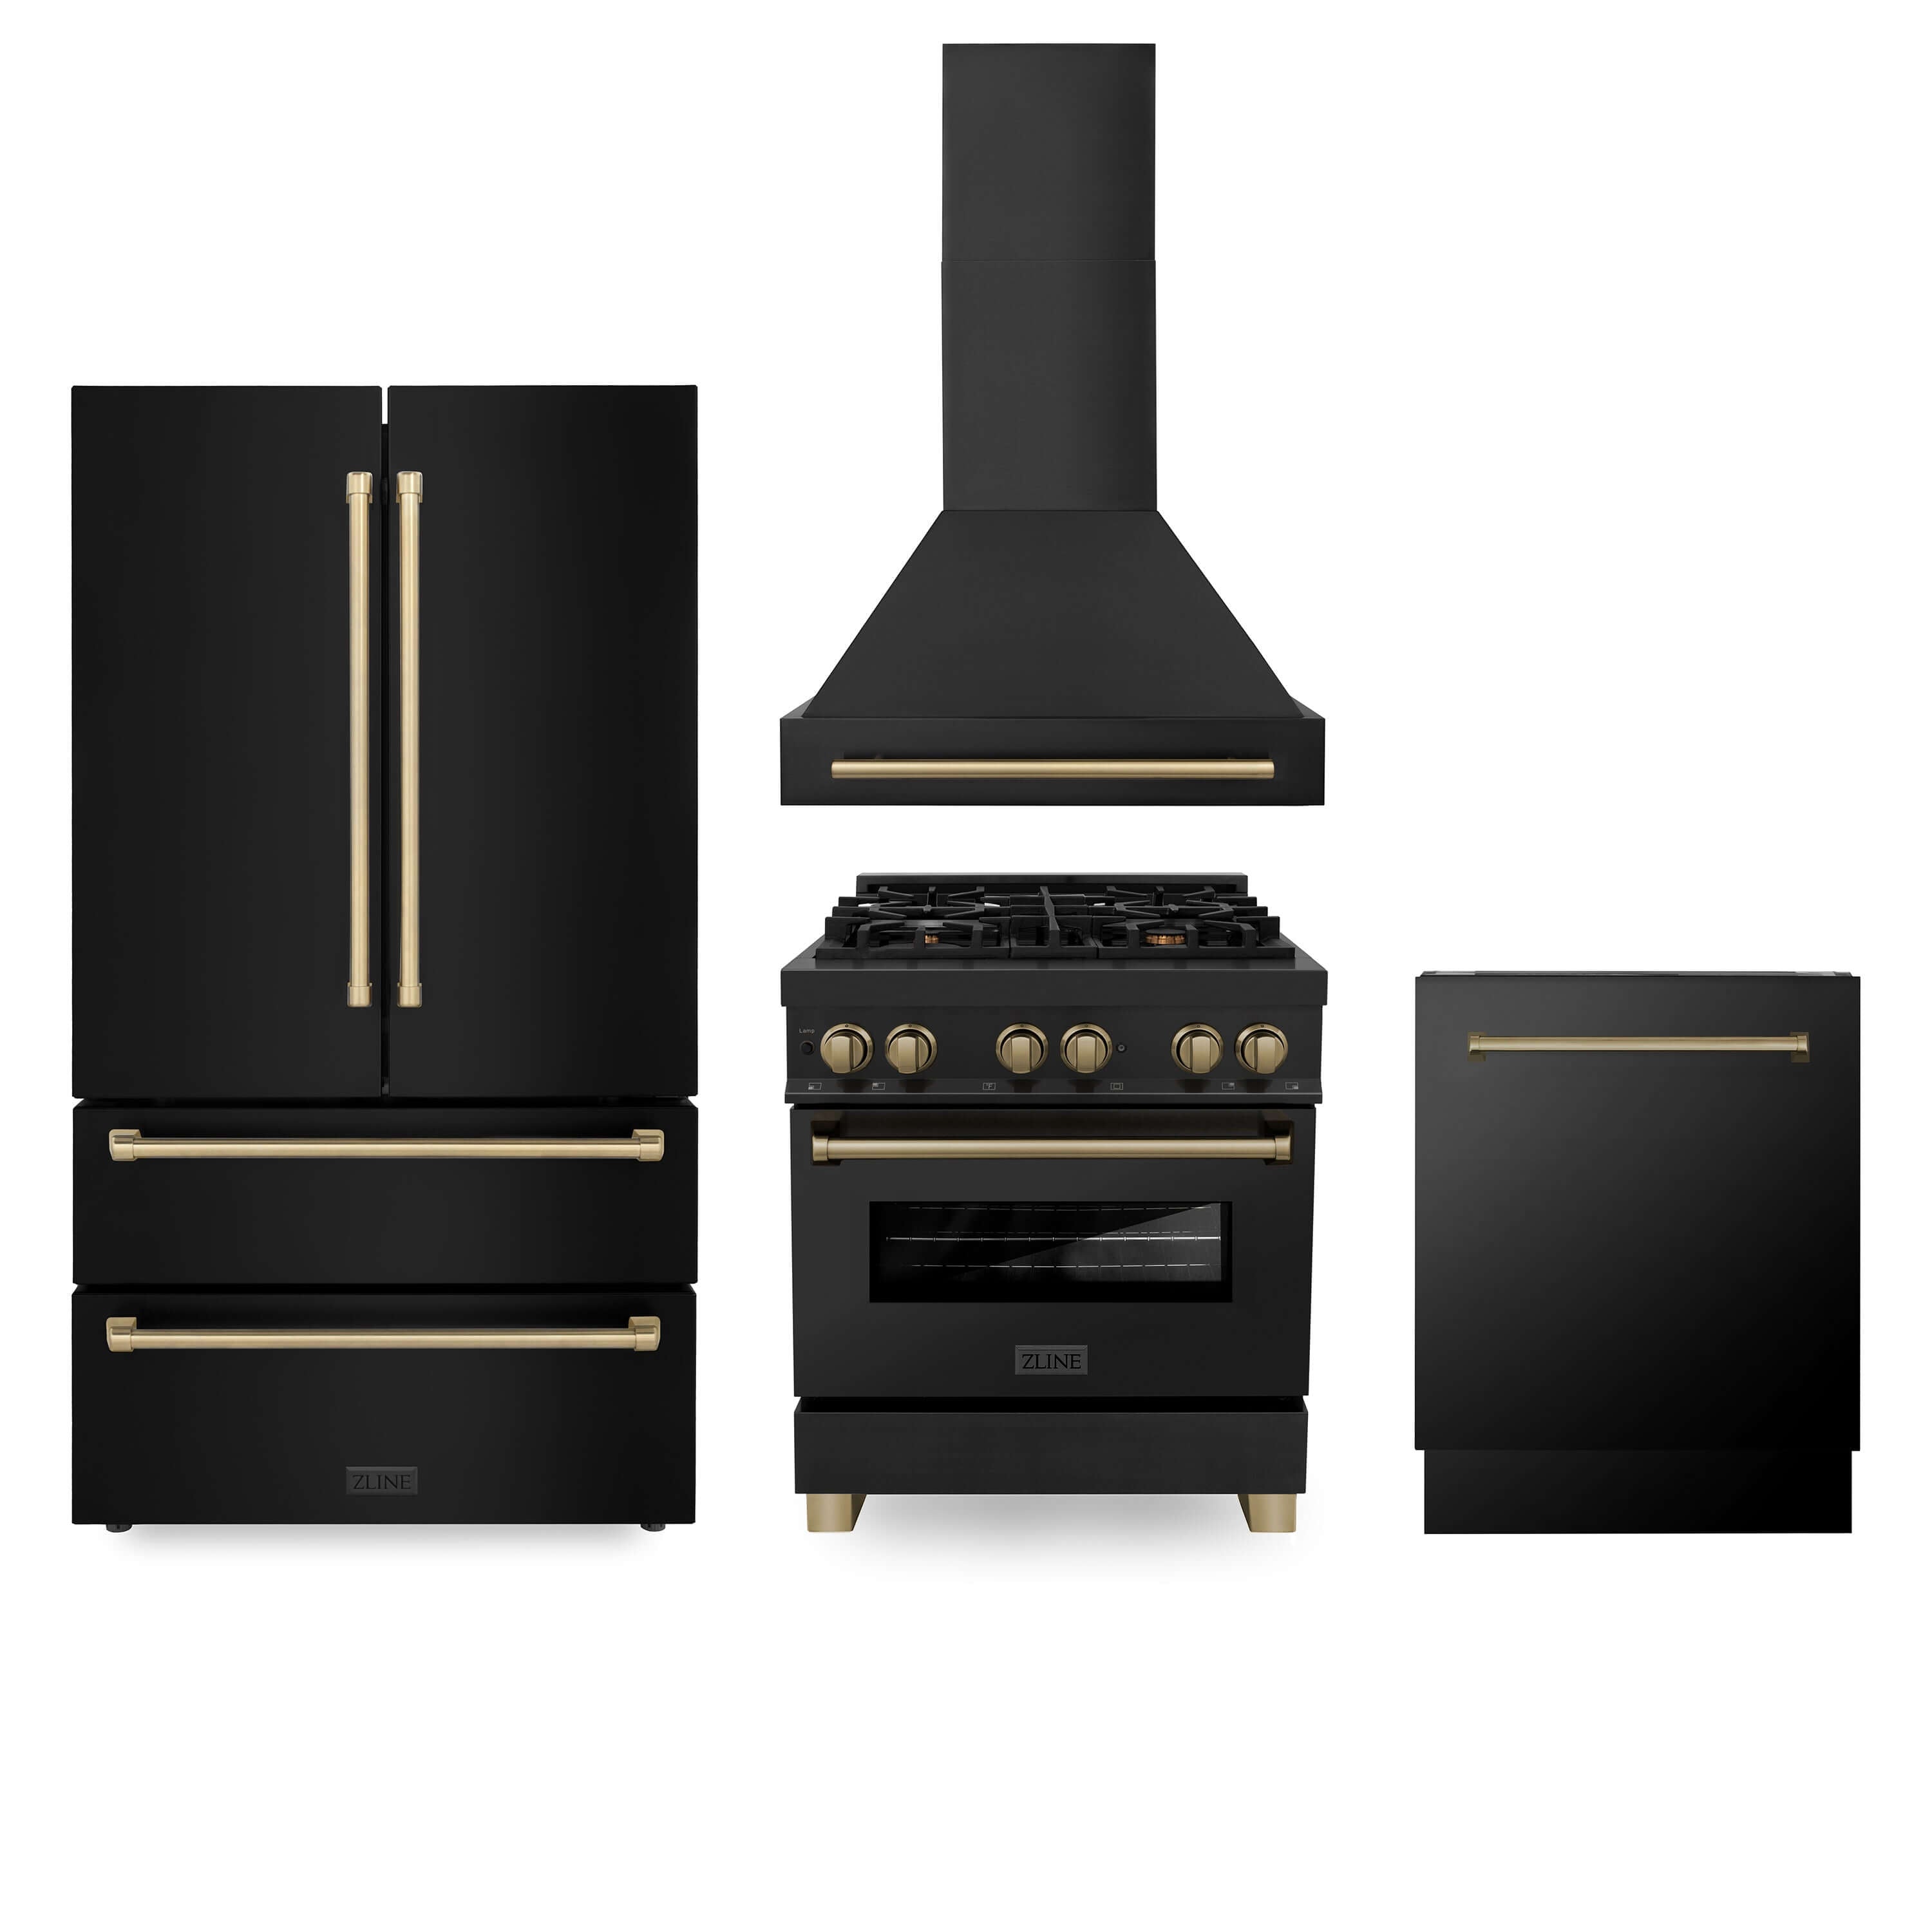 ZLINE 4-Piece Autograph Edition Black Stainless Steel Kitchen Package with Range, Range Hood, Dishwasher, and French Door Refrigerator with matching Champagne Bronze accents.